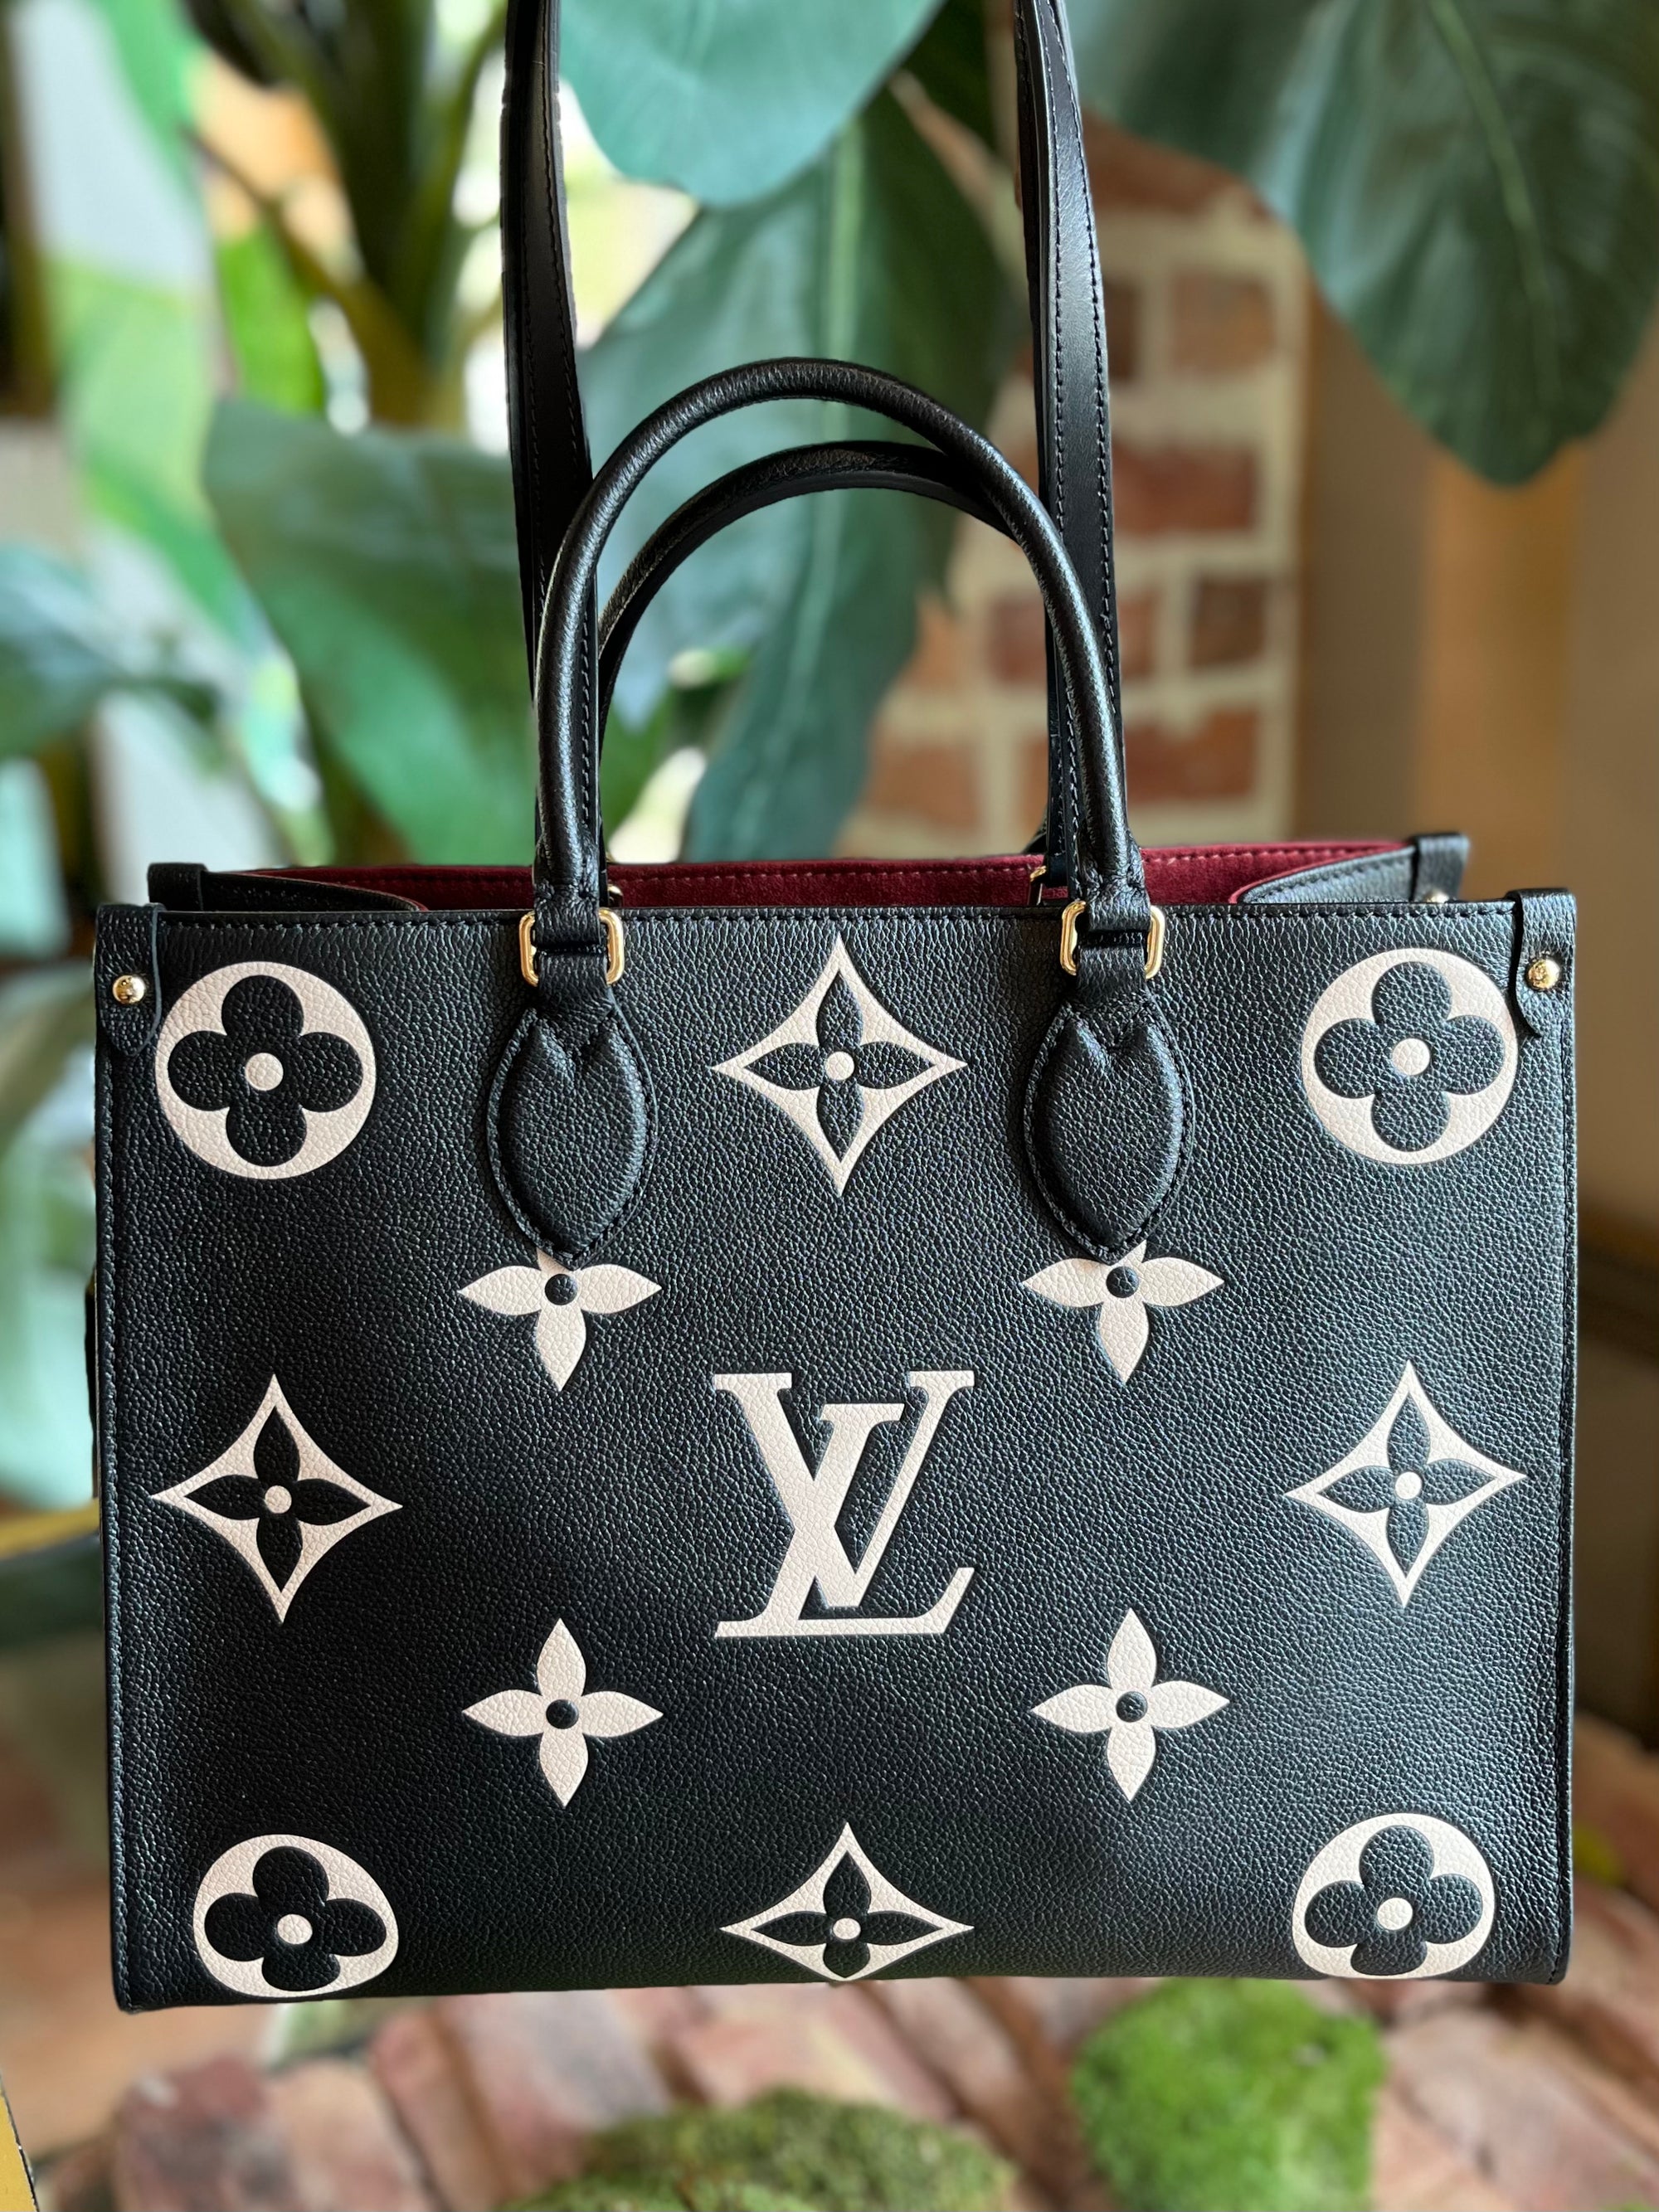 Authentic Louis Vuitton OnTheGo Gm Black Leather Tote Shoulder Bag